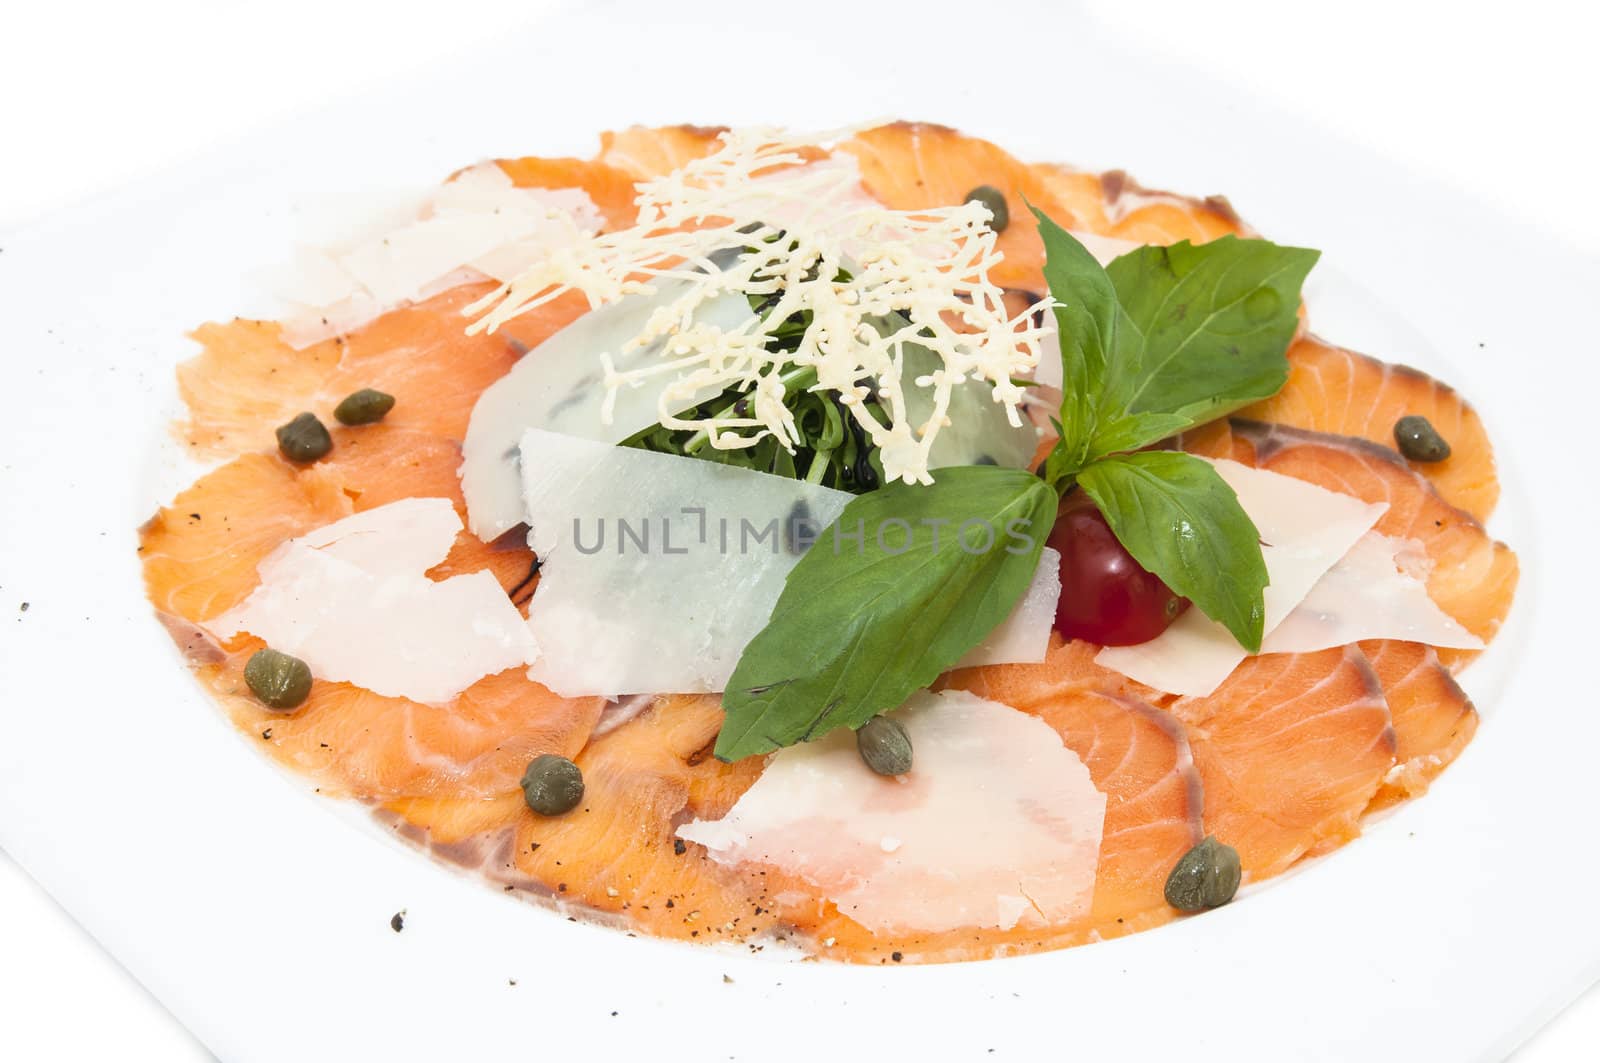 Carpaccio of salmon with fresh herbs and cheese